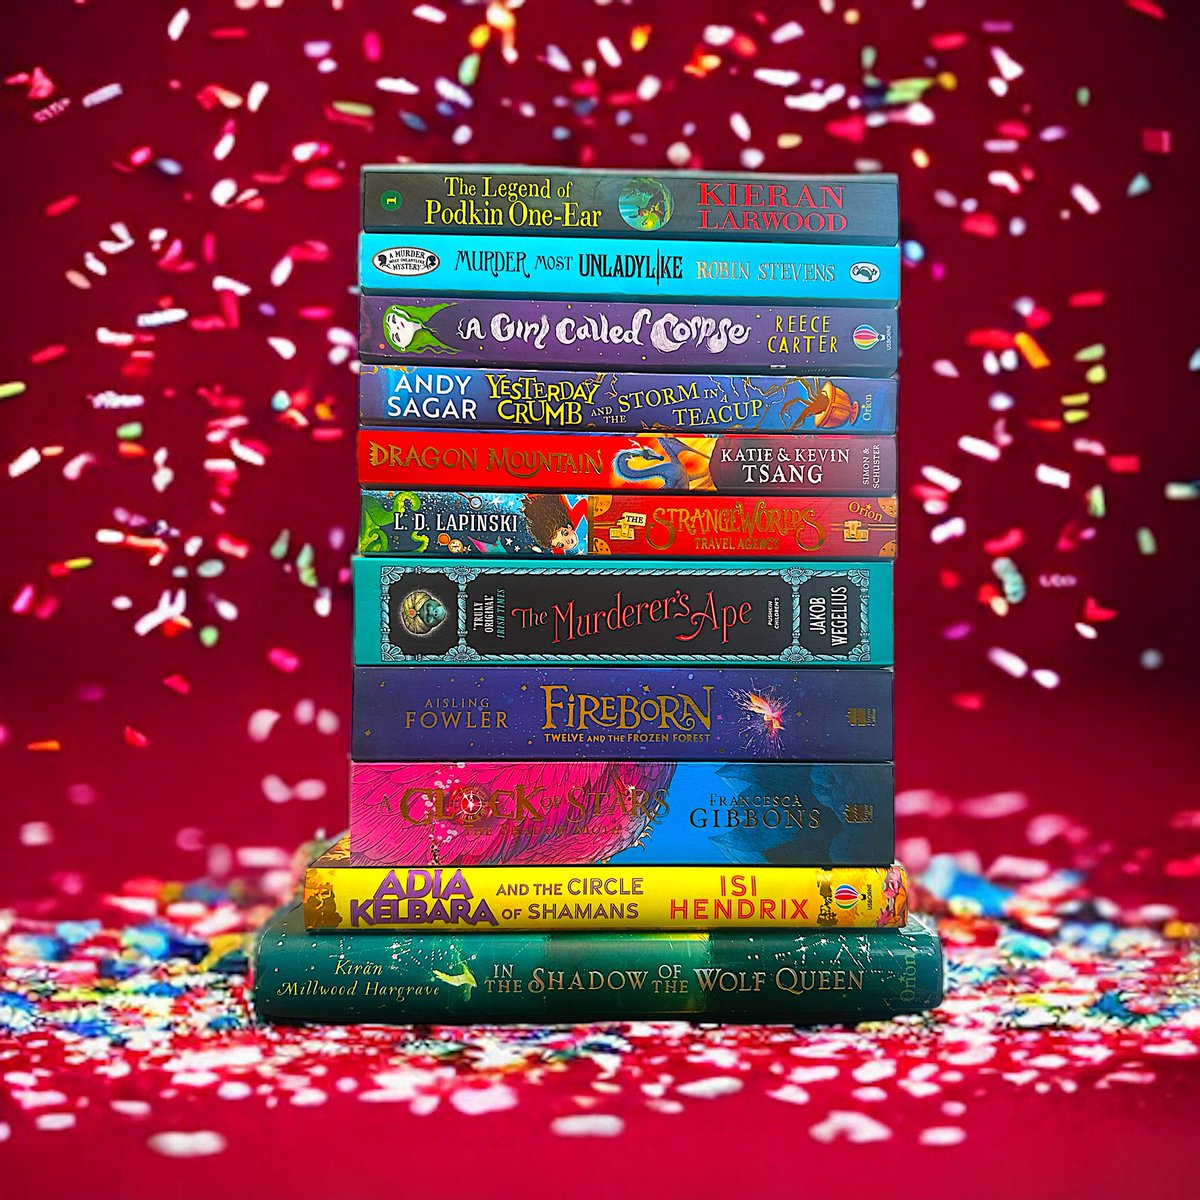 I did a giveaway on my instagram, so here’s one for twitter. When I hit 500 followers, I’ll be giving this bundle of 11 books that I’ve adored To enter: Follow me Like post Reshare Comment three book accounts (preferably libraries, teachers, schools, parents)